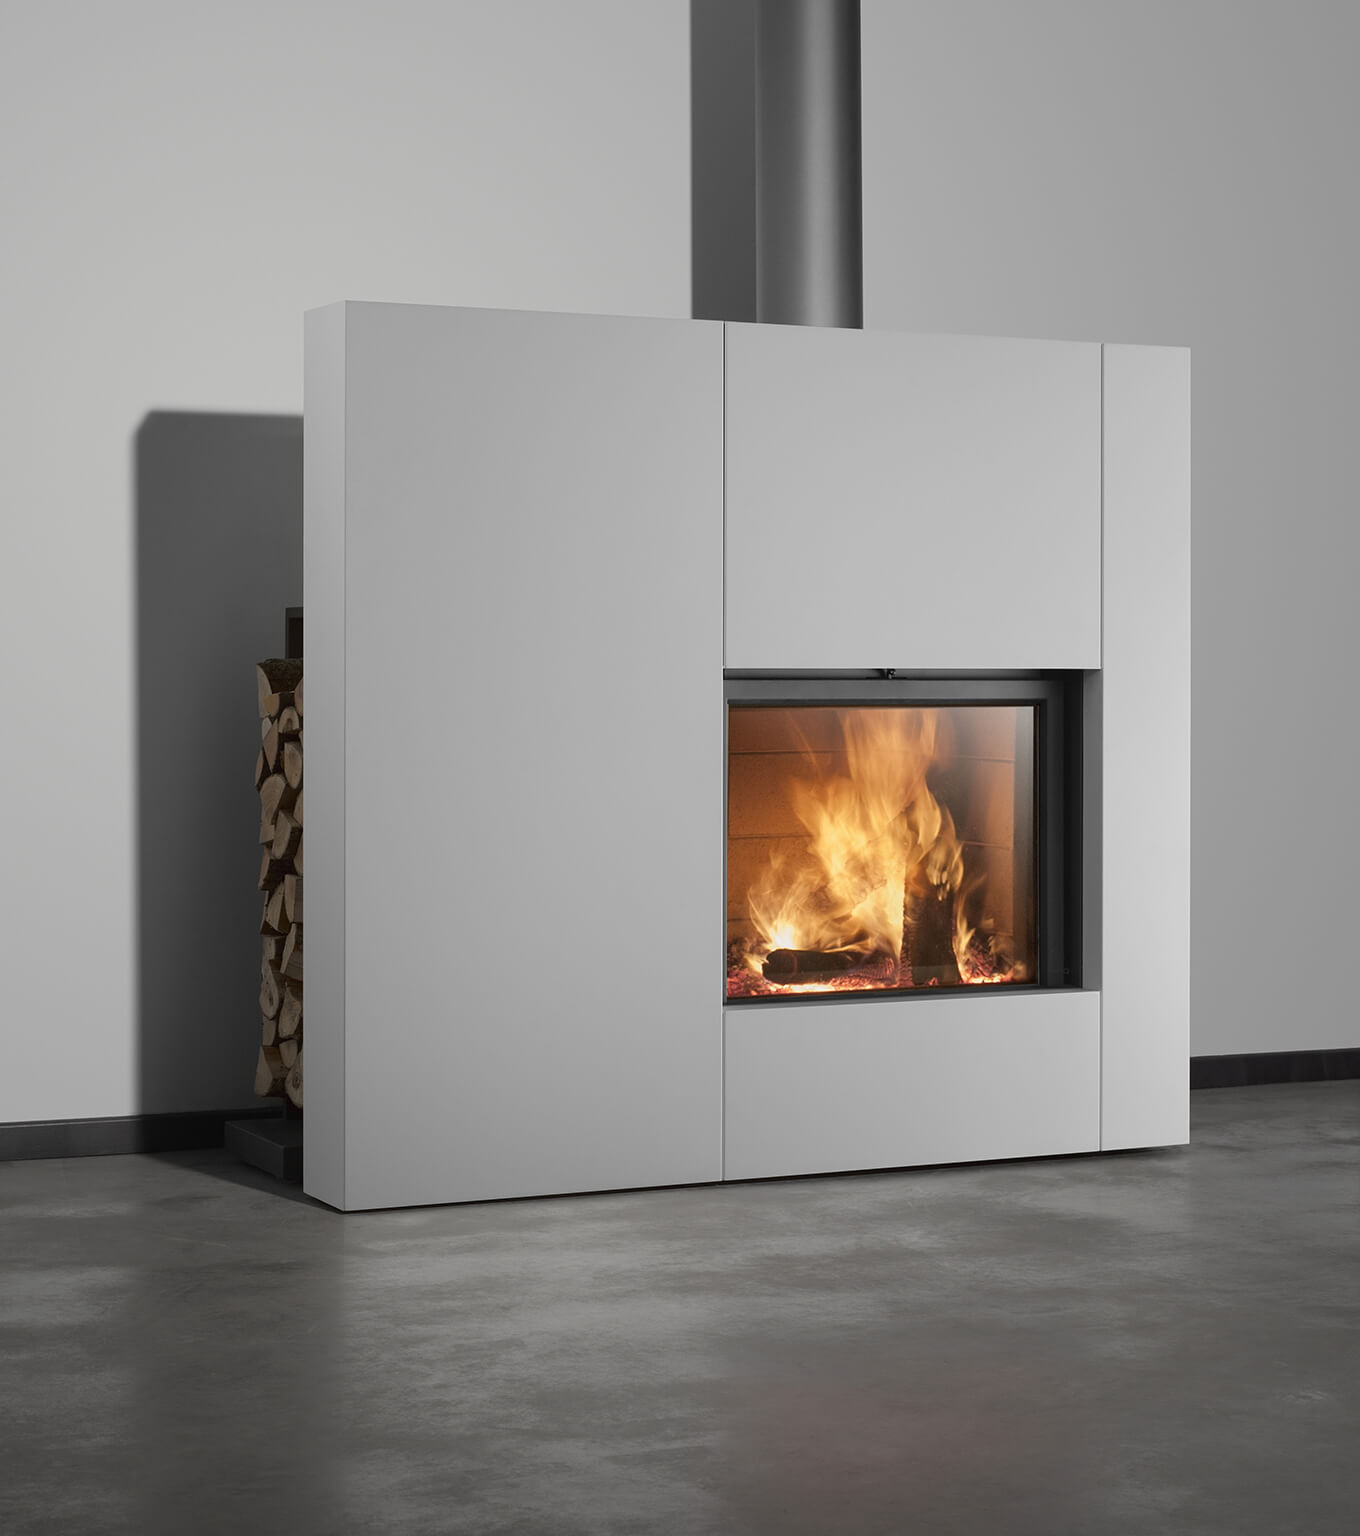 Stuv 21 single sided fireplace with white cladding and wood storage